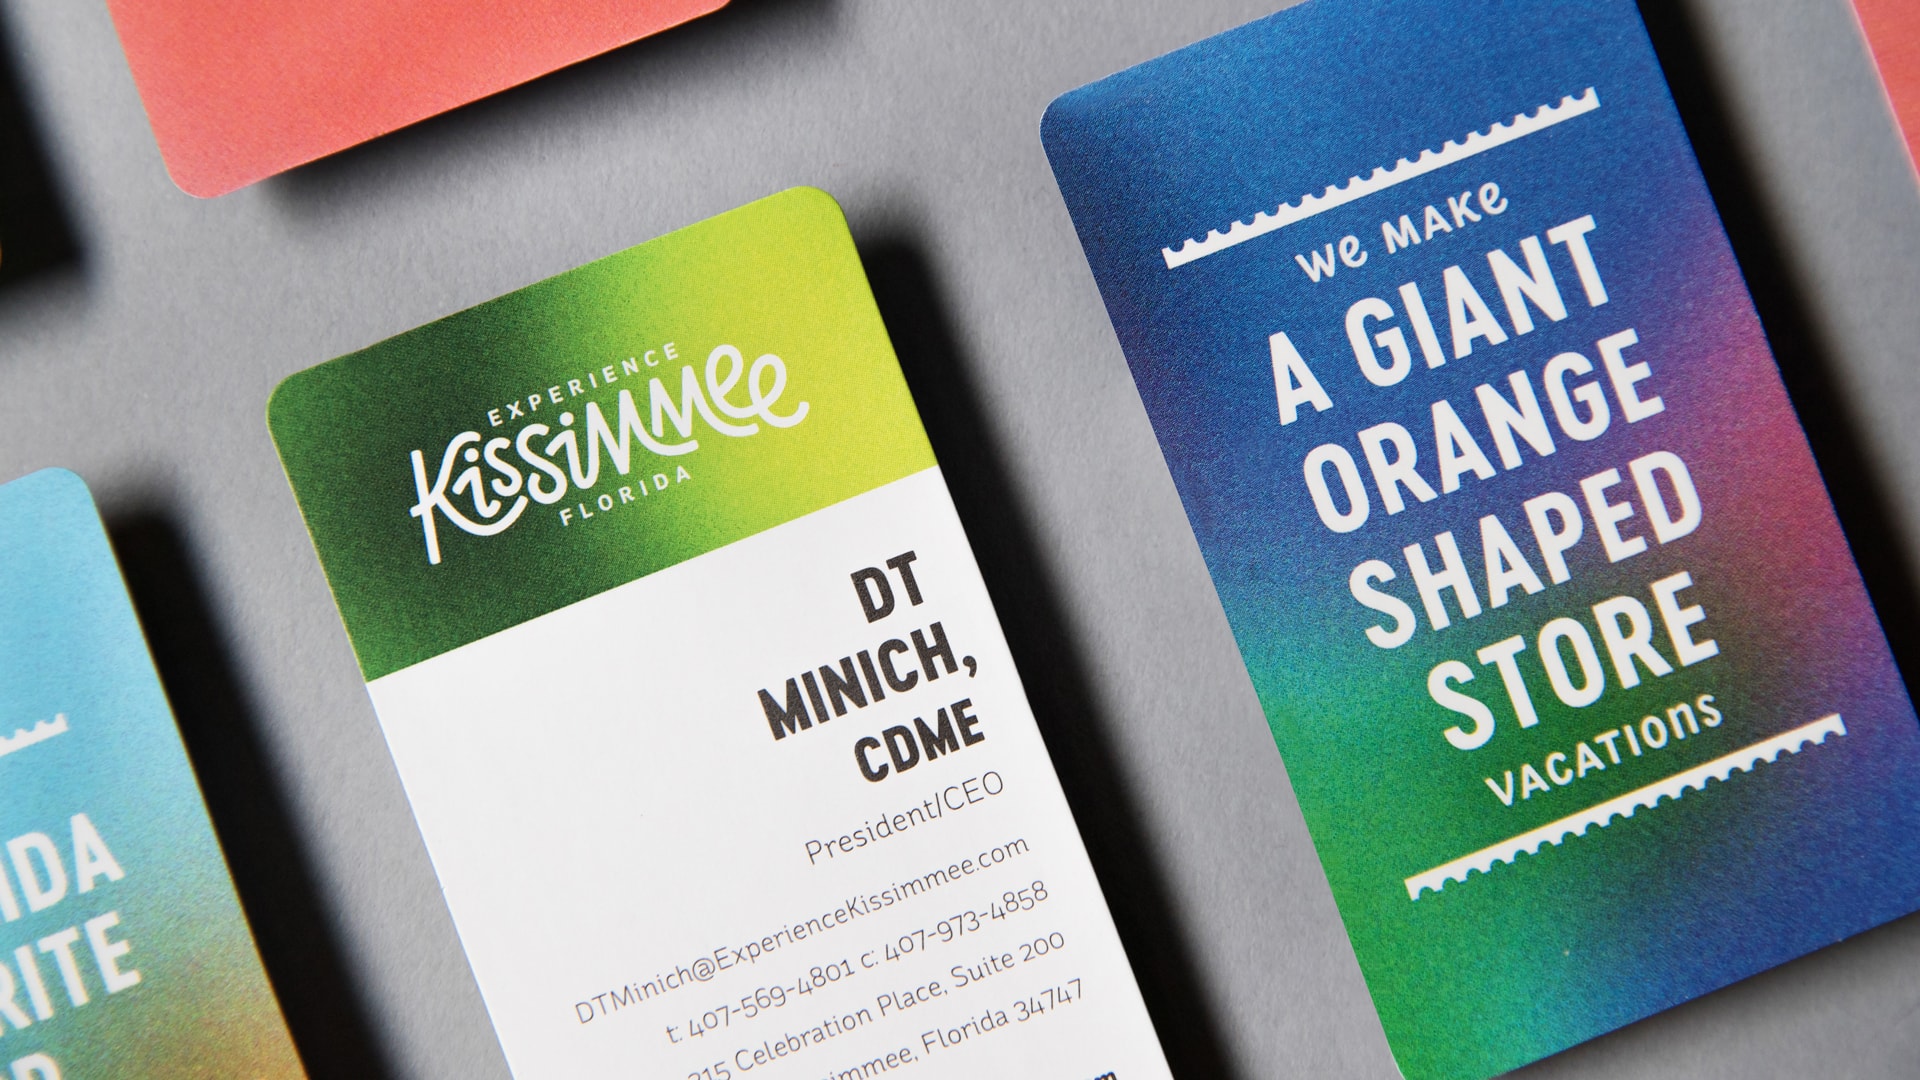 Experience Kissimmee Destination marketing and rebrand - business cards